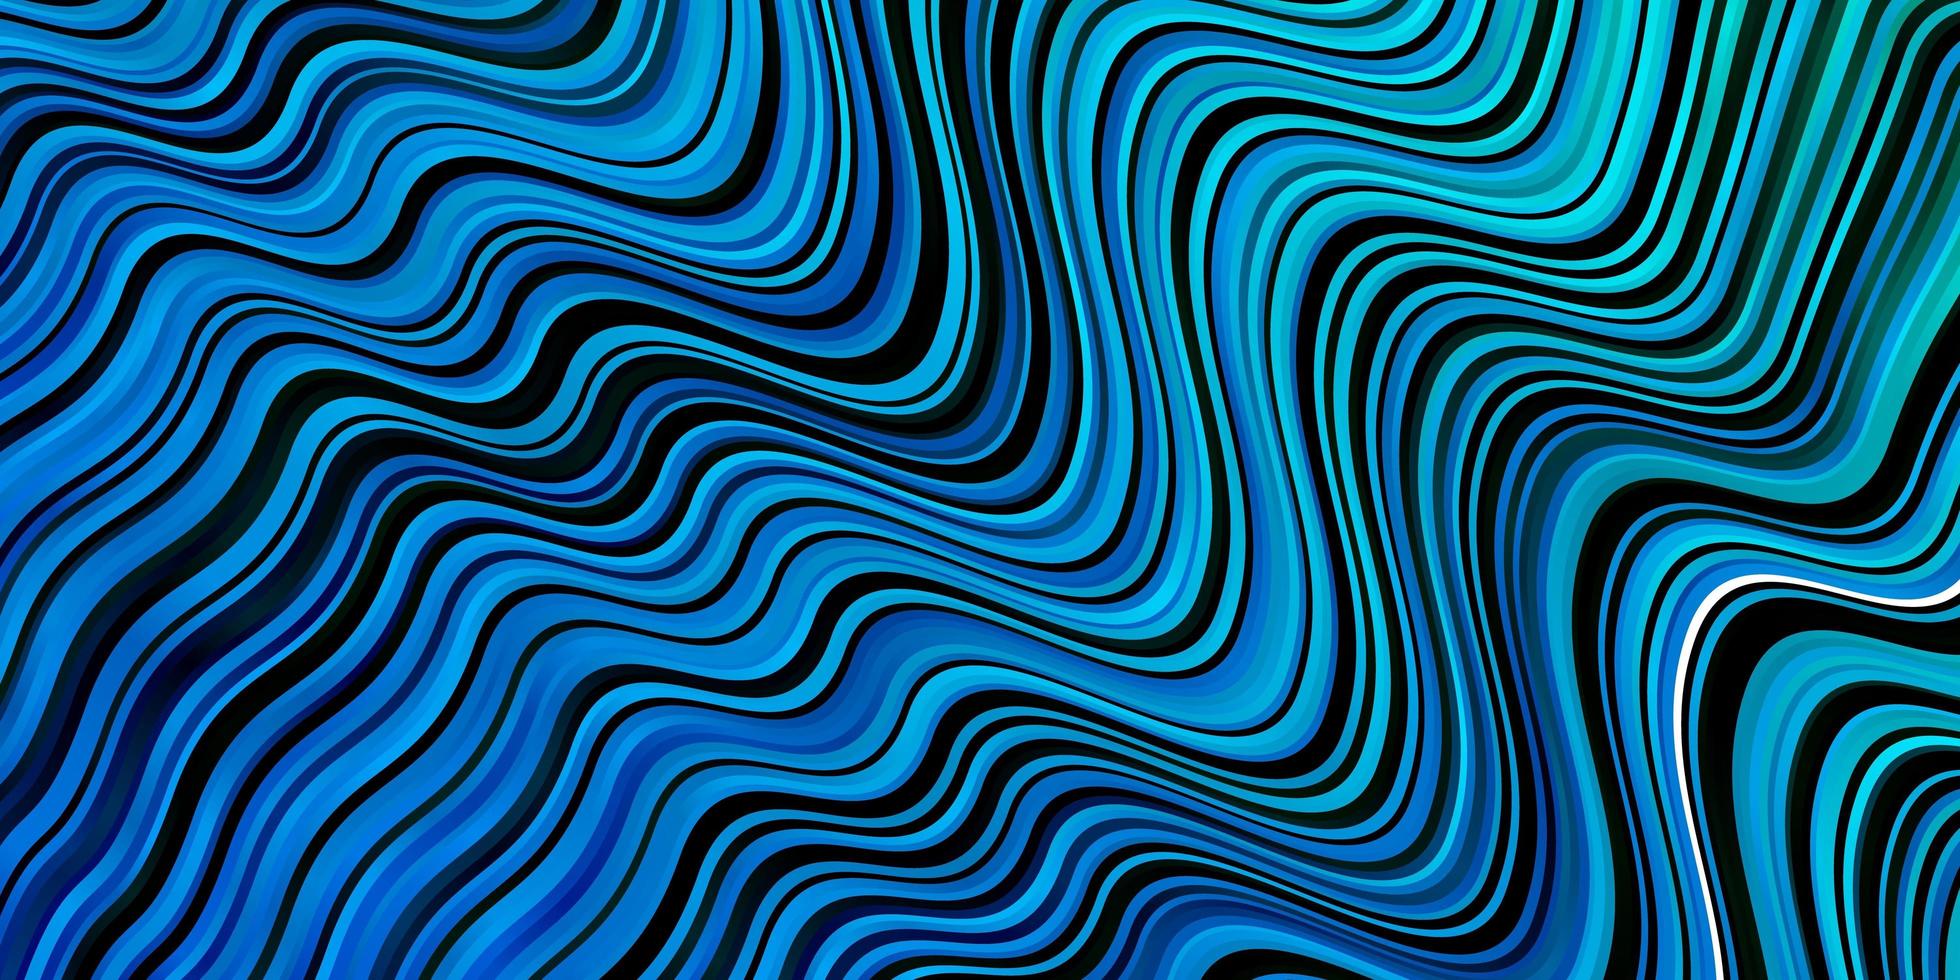 Dark BLUE vector pattern with wry lines